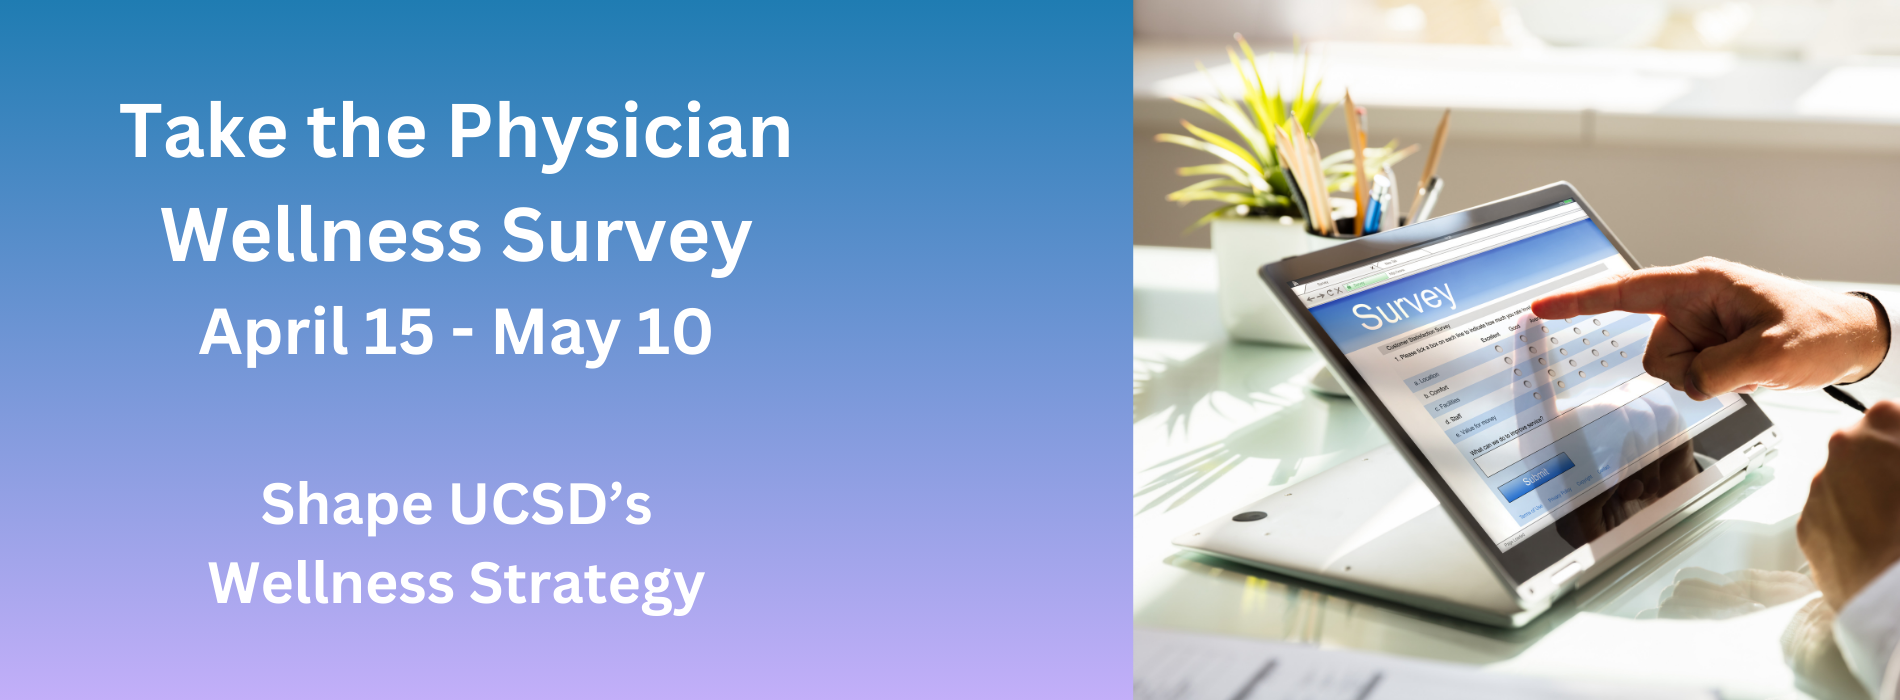 Take the Physician Wellness Survey April 15-May10